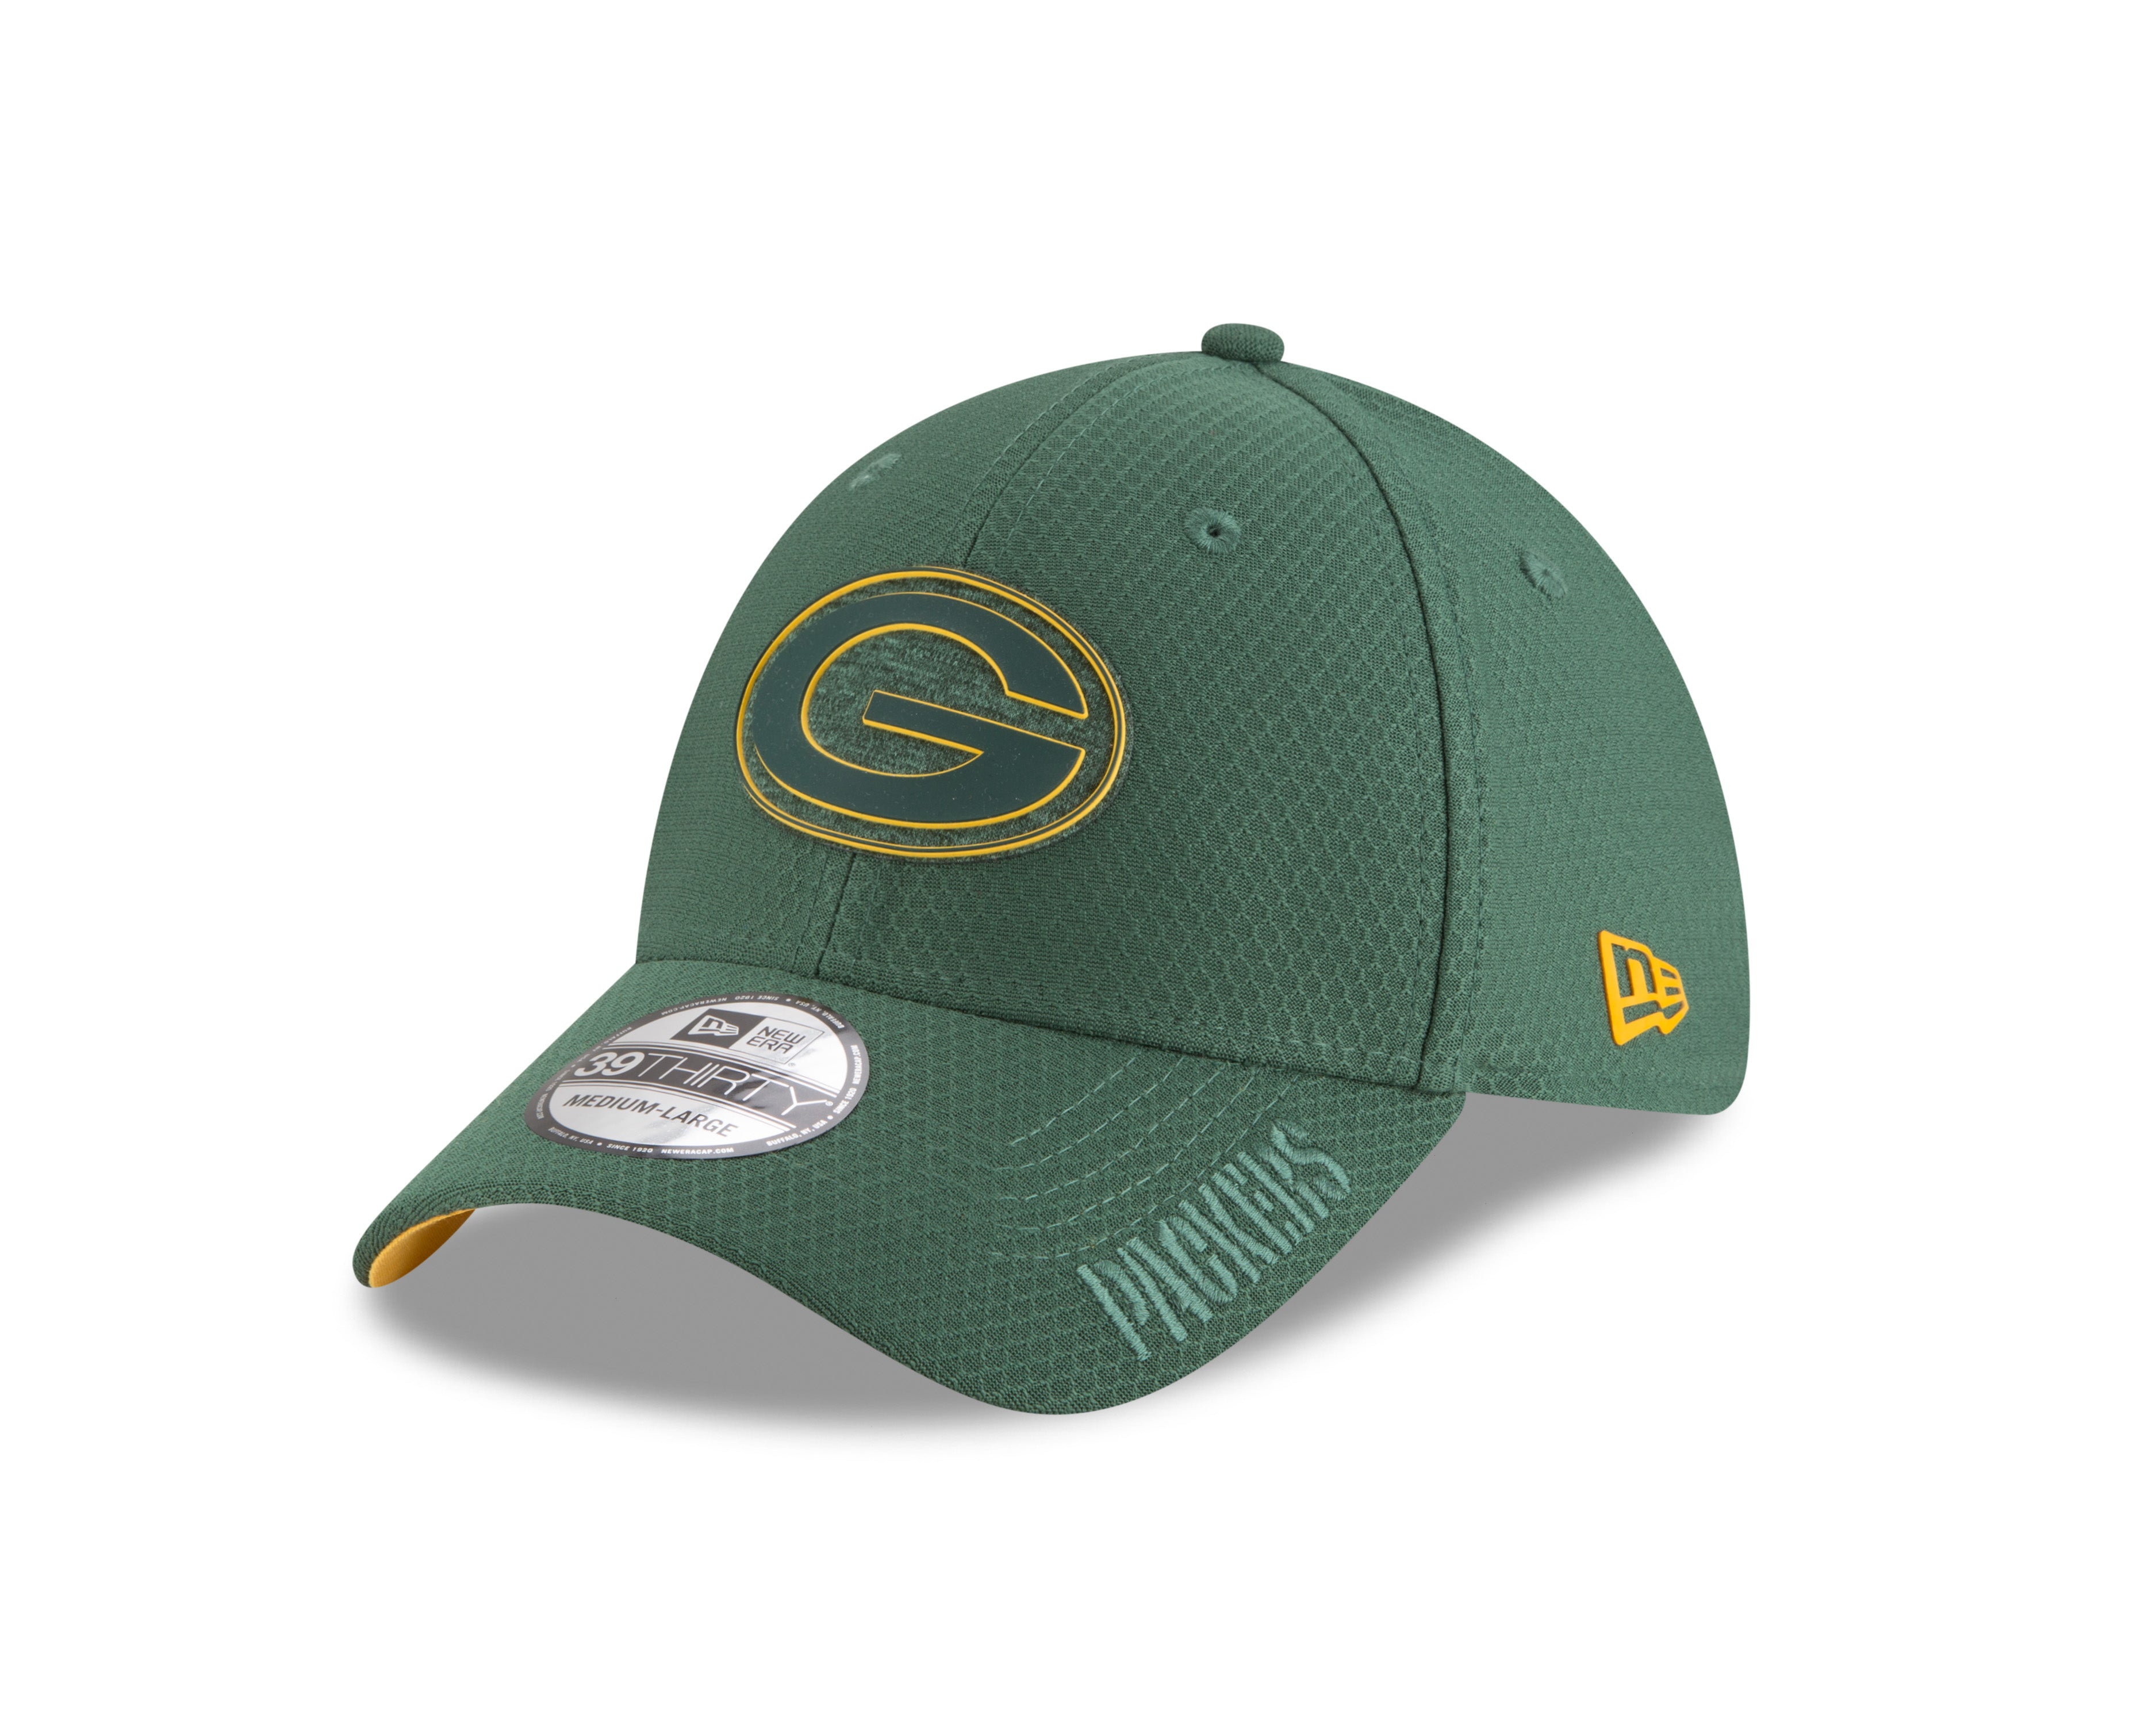 Camp Training Green Green Bay Hat Stuff 39THIRTY Packers Bay Fit Flex –